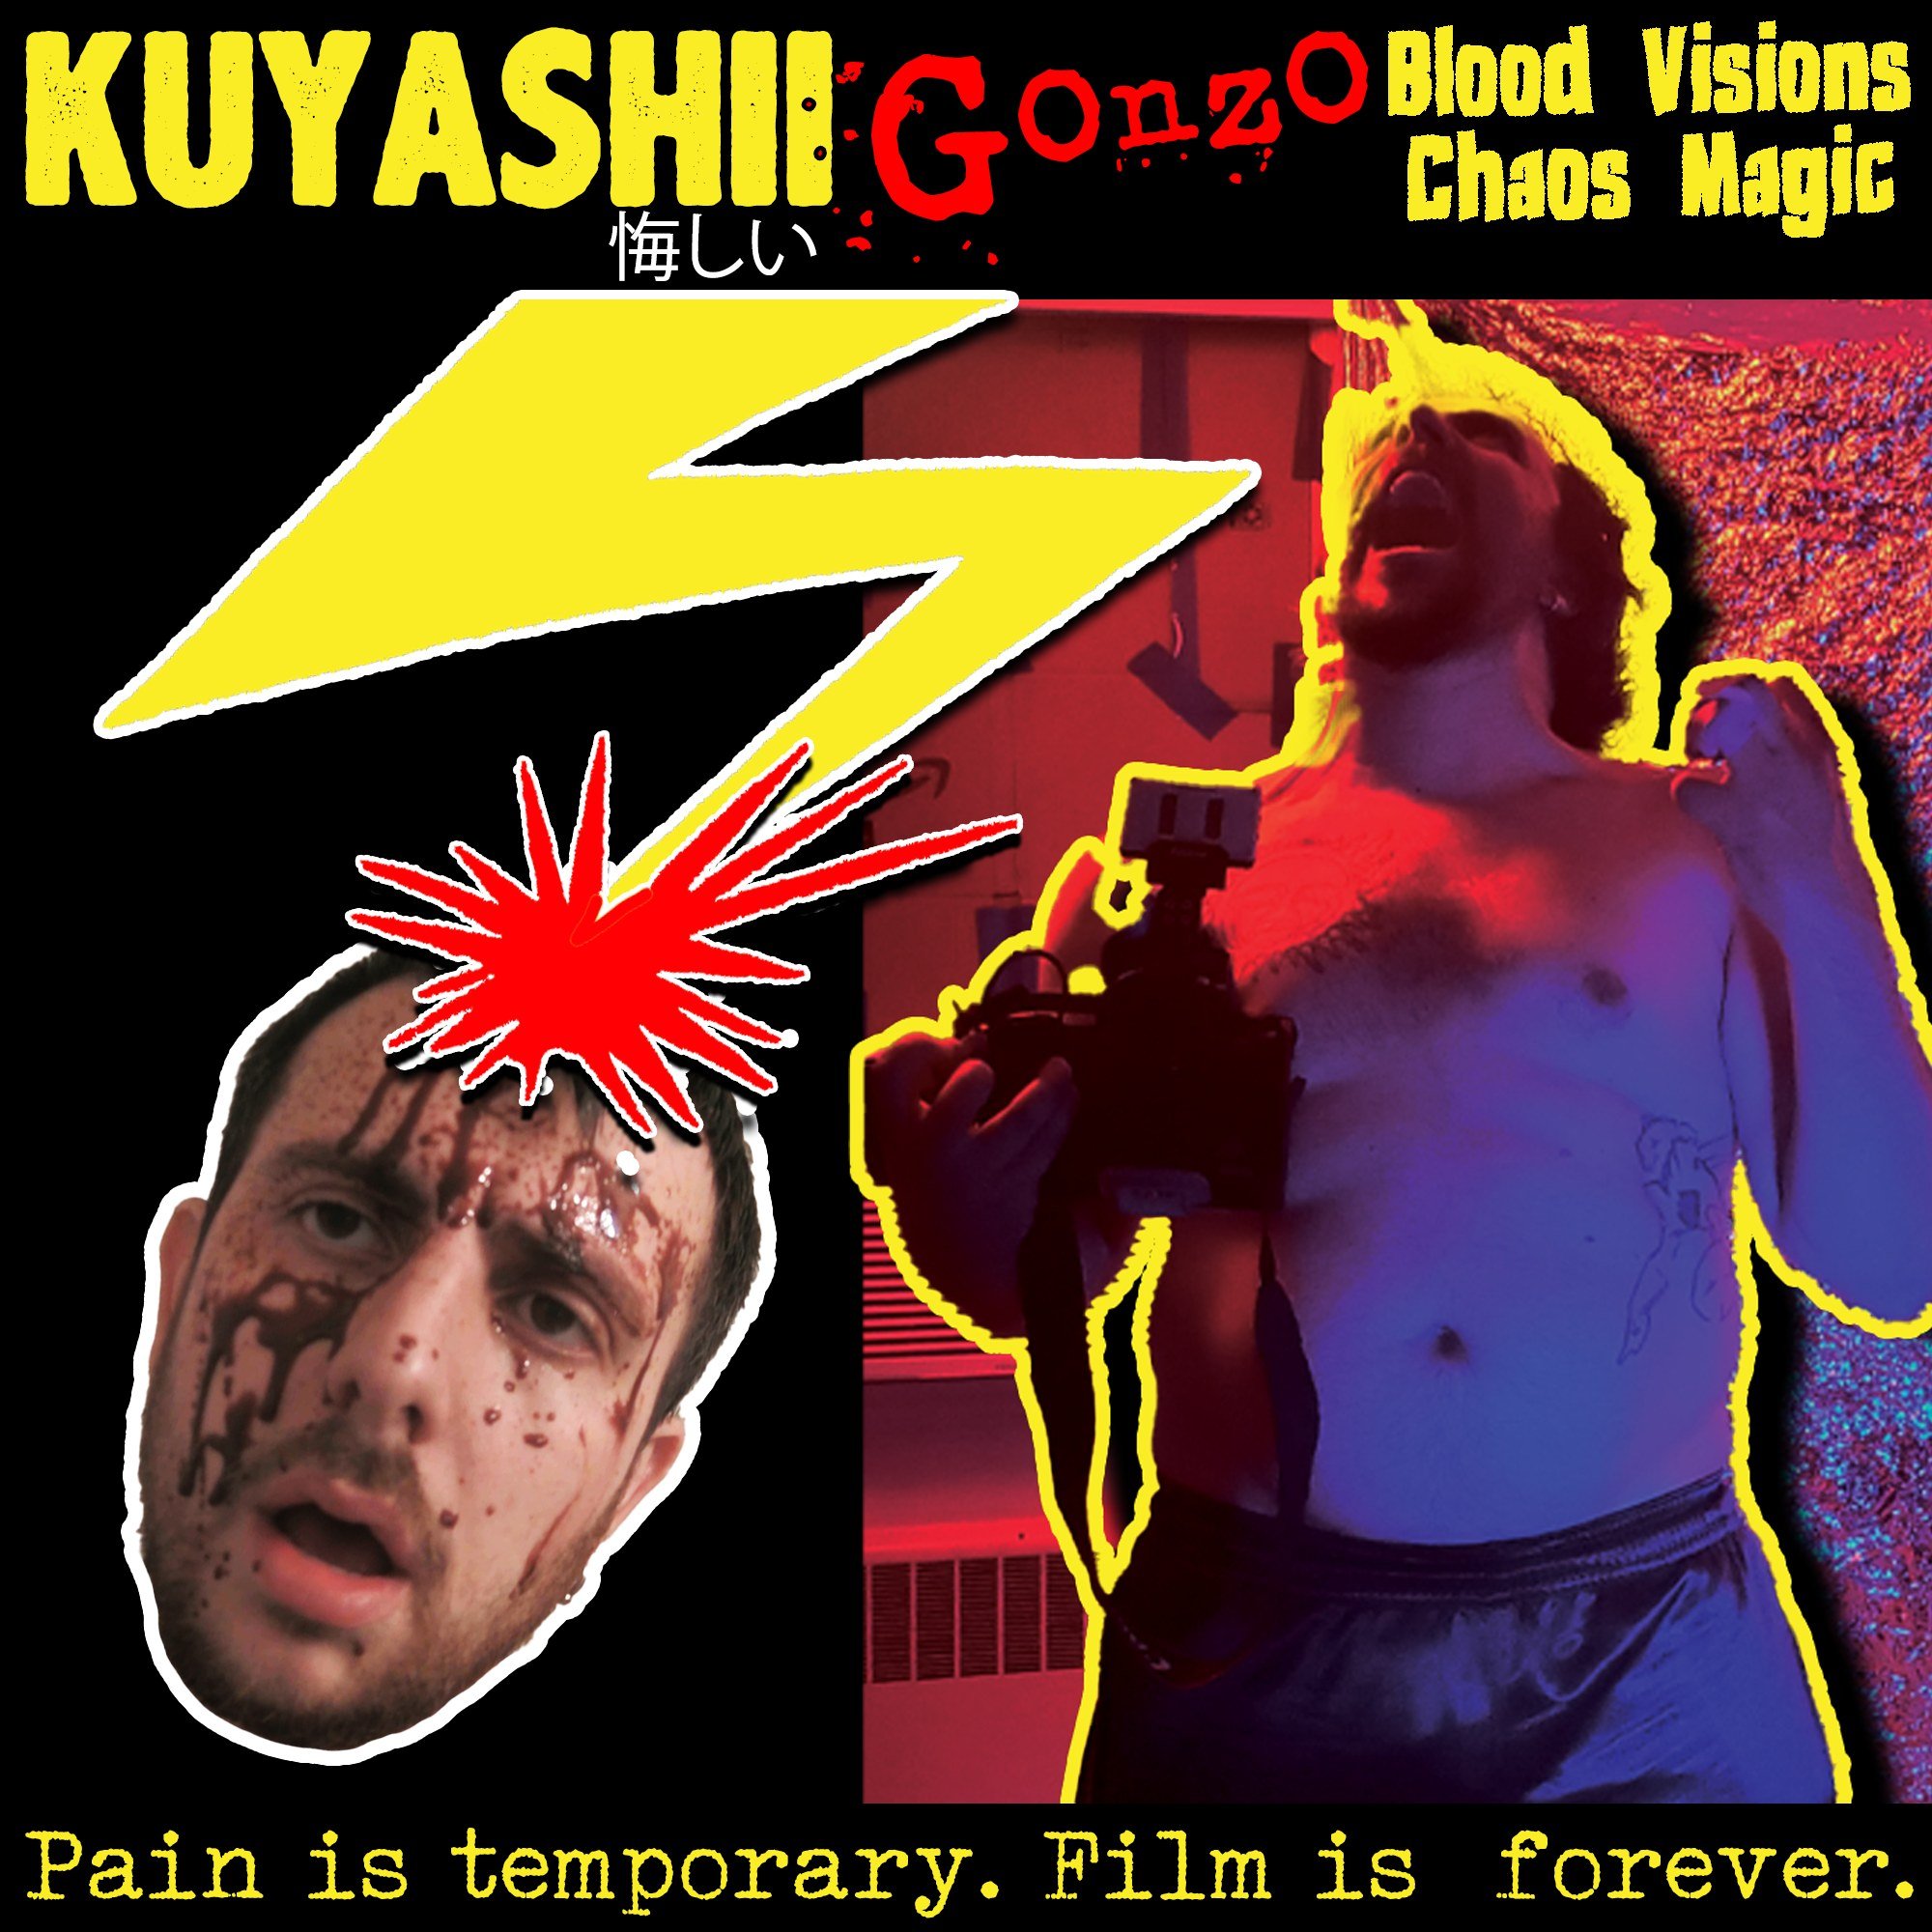 TRAILER PREMIERES AT 12 PM EST ON YT! 
Kuyashii Gonzo: Blood Visions &amp; Chaos Magic - A new #gonzo #documentary coming soon.

#frumess #filmmaking #nobudget #microbudget #indiefilm #art #diy #microbudgetfilmmaking #nobudgetfilmmaking #indiefilmmak